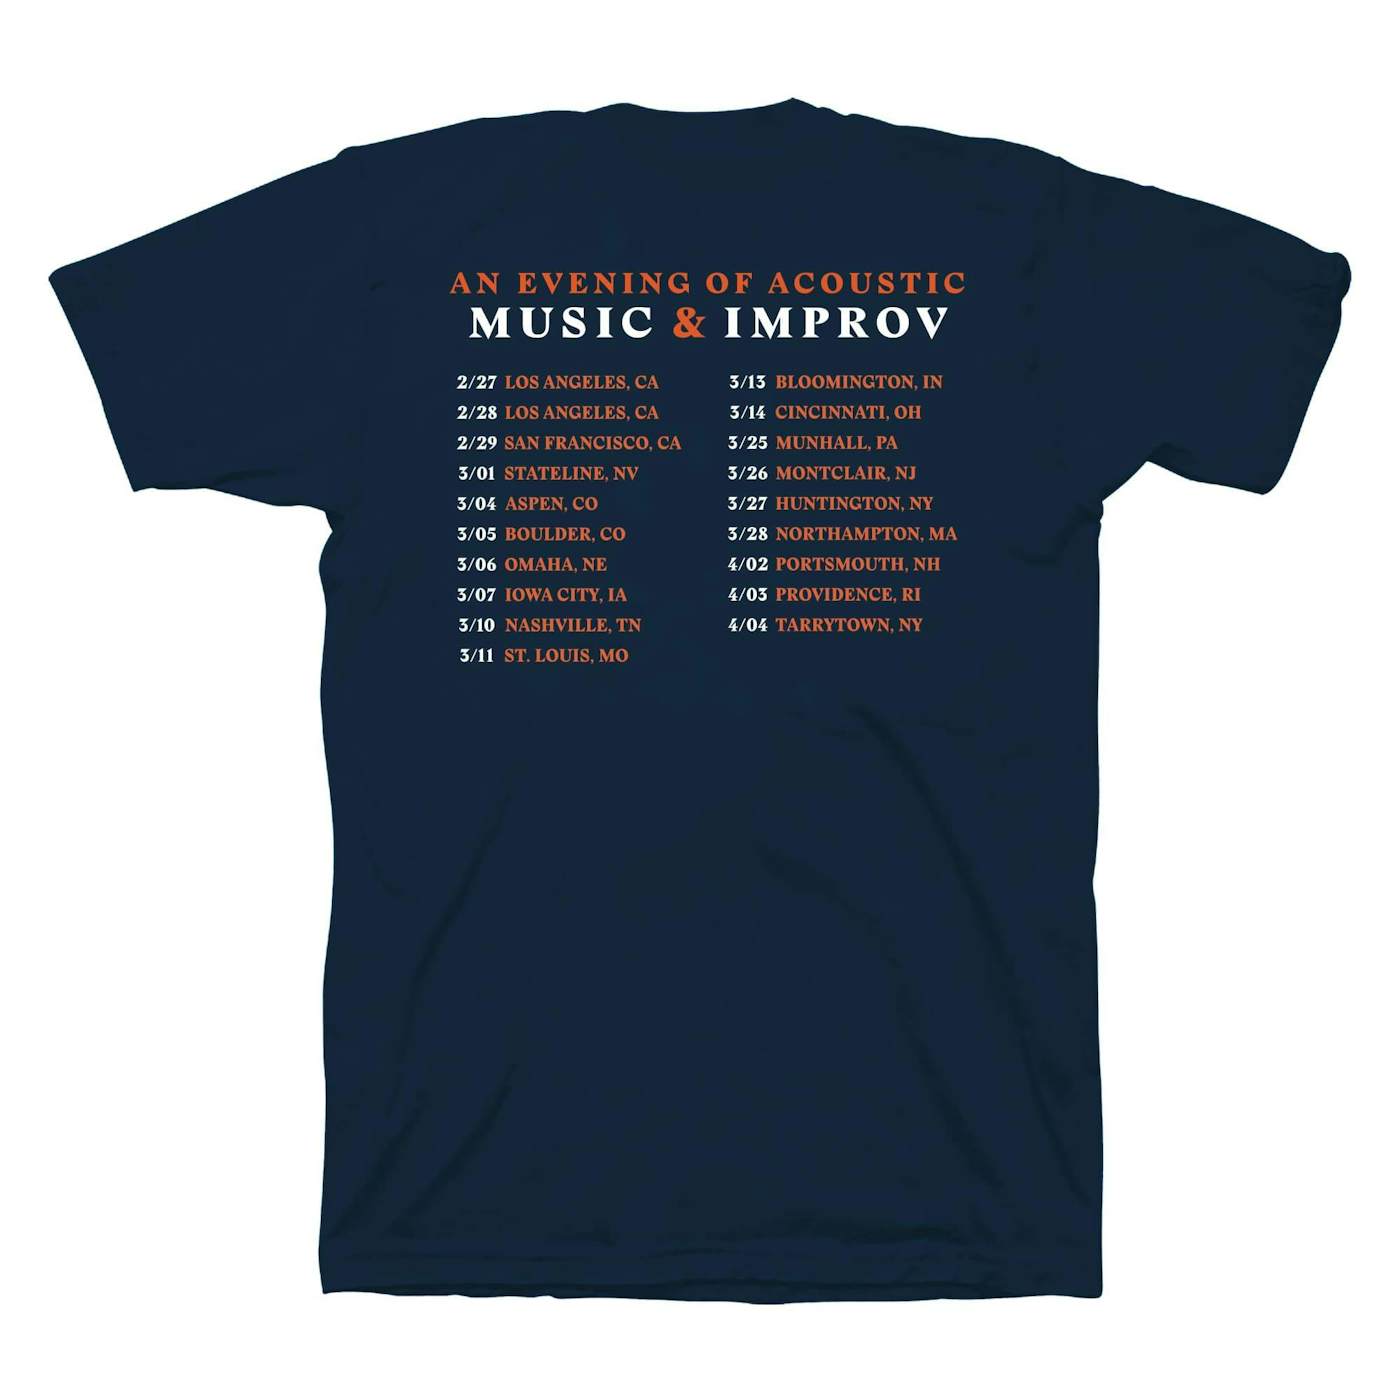 Guster 'Music & Improv' Acoustic Tour T-Shirt